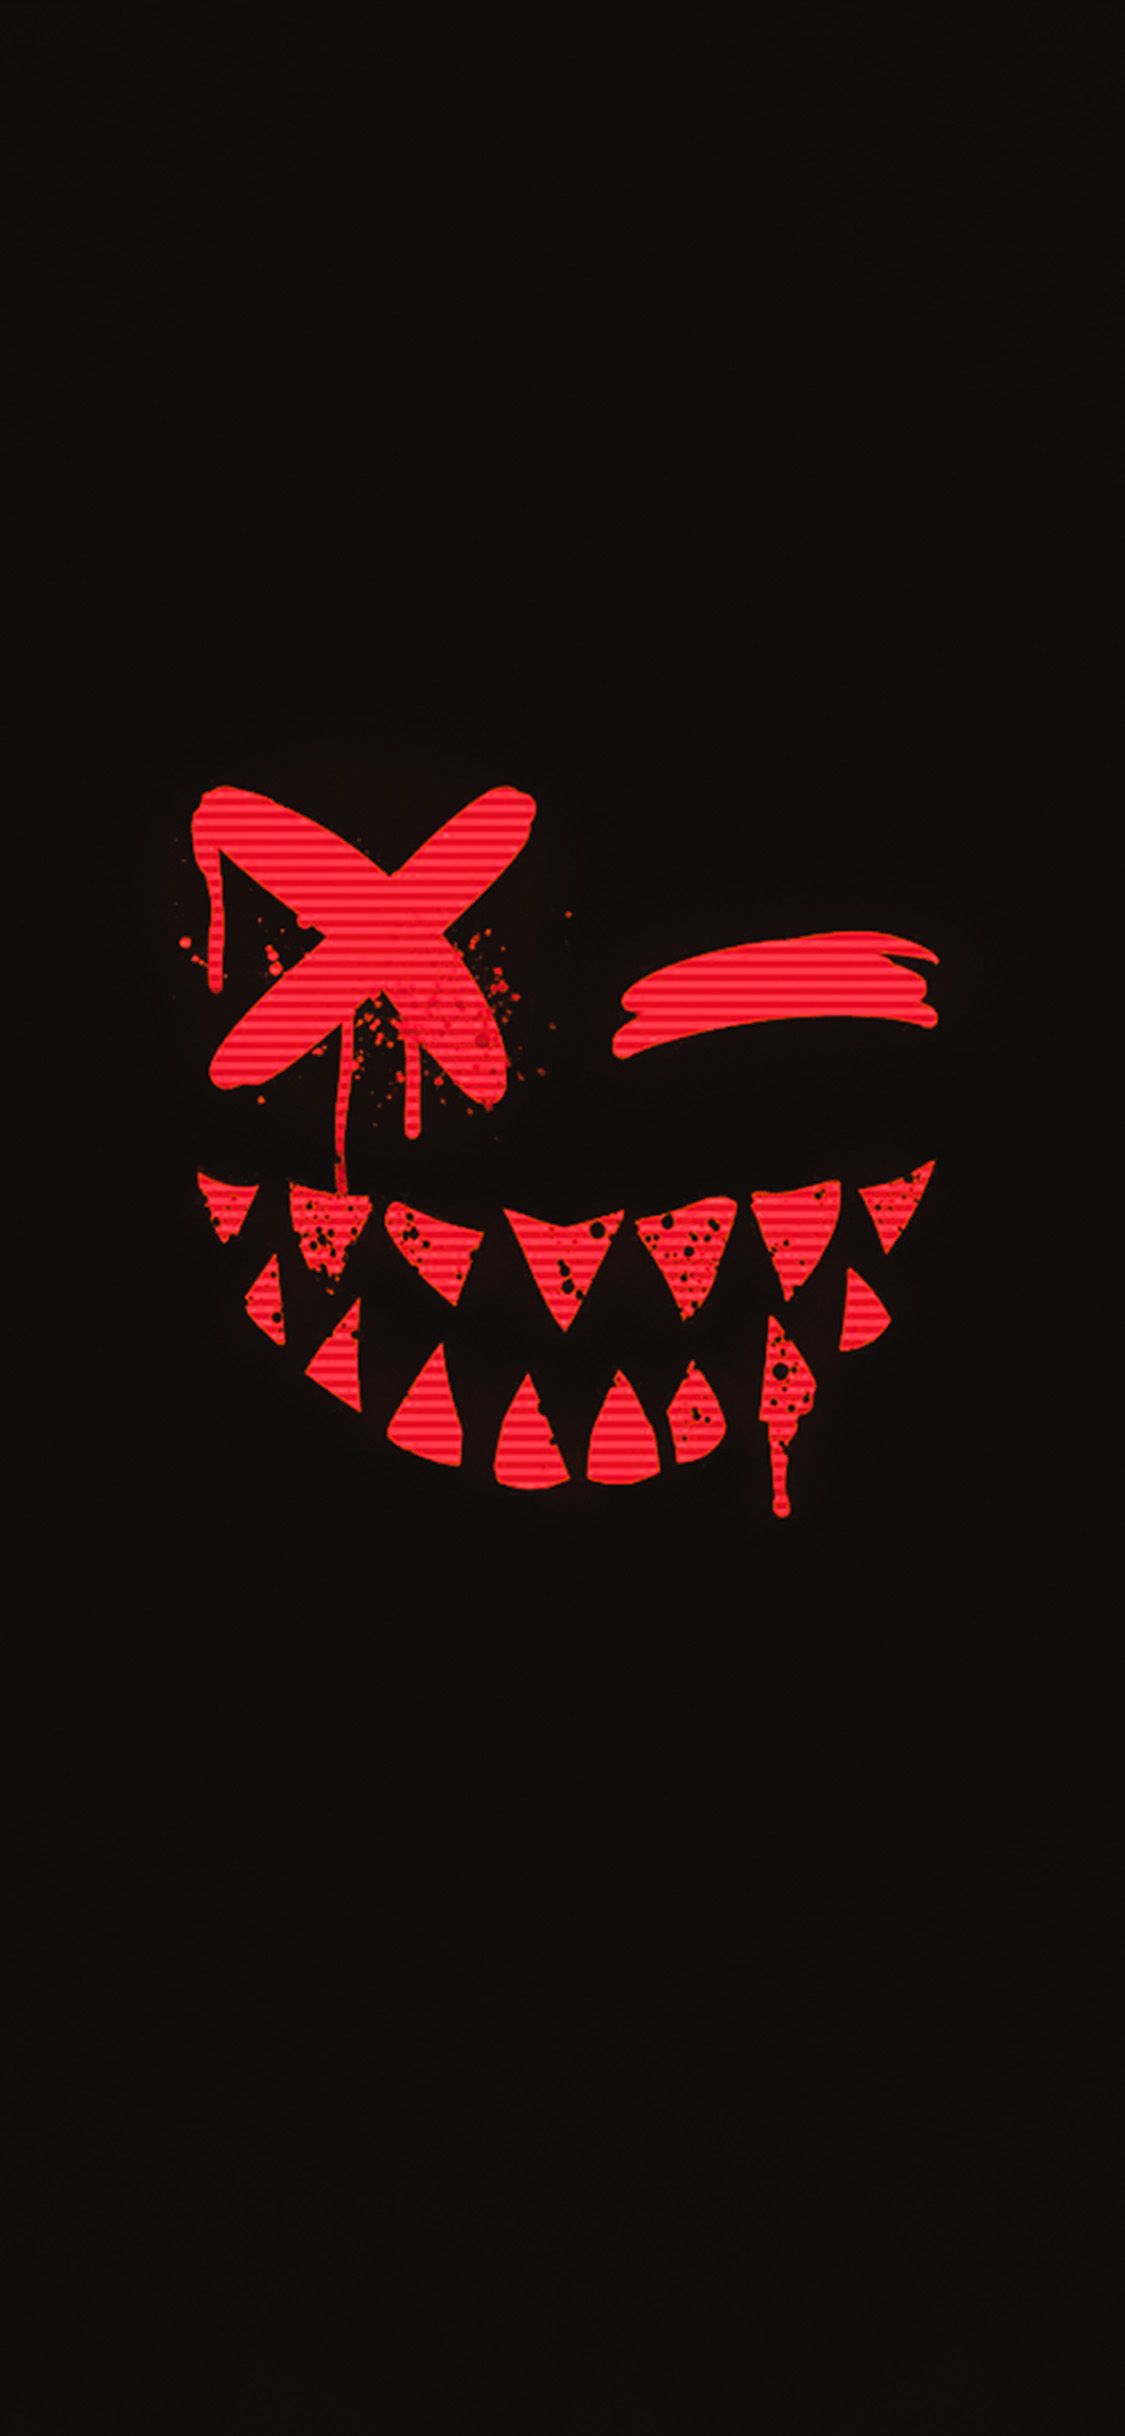 A red and black poster with an image of the face - Smile, horror, dark red